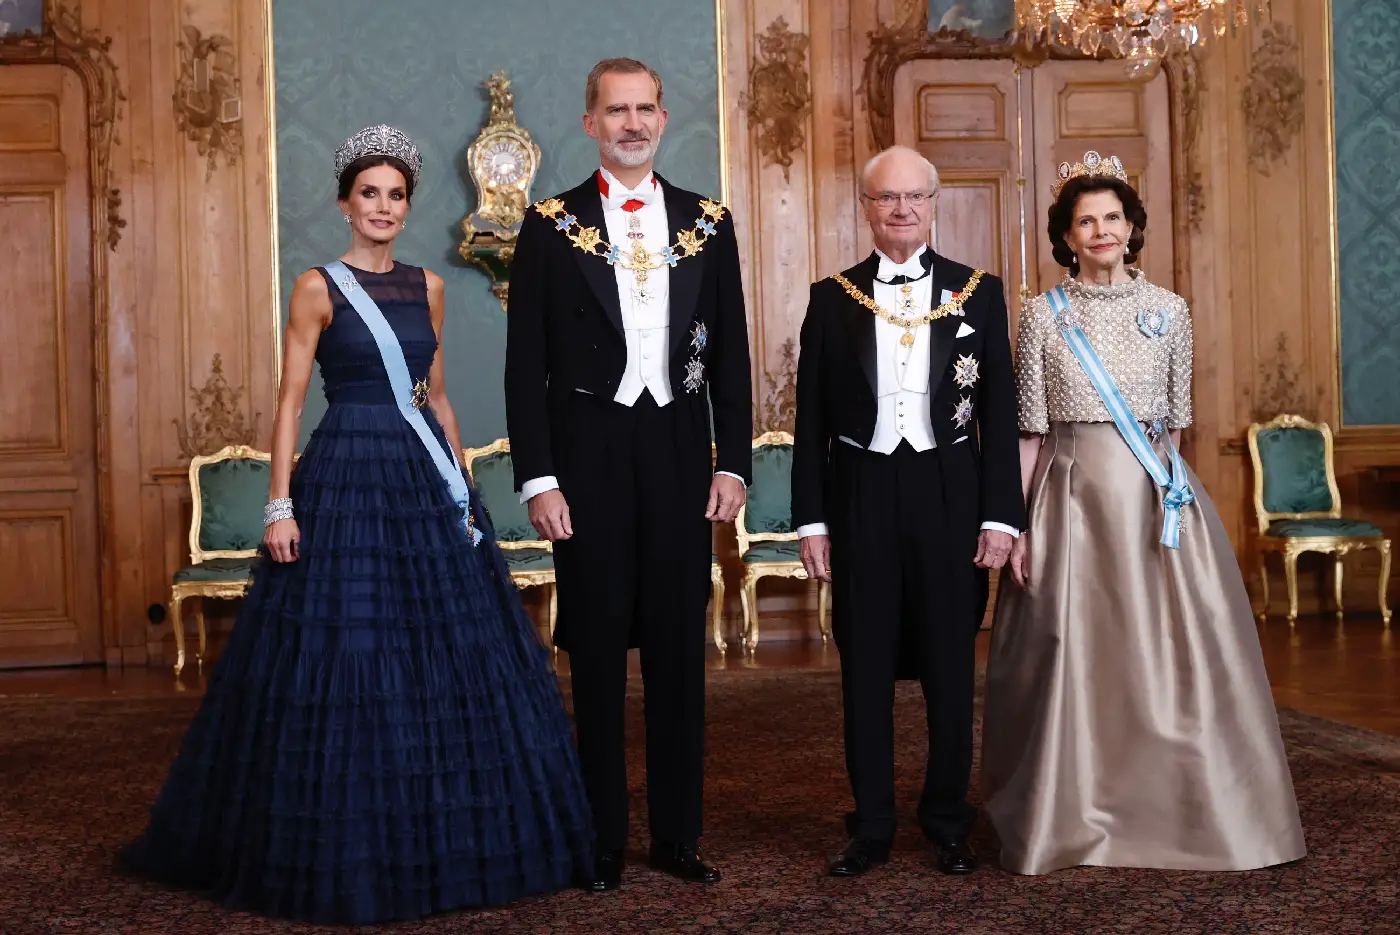 King Felipe and Queen Letizia of Spain attended the State Banquet during the Sweden State visit